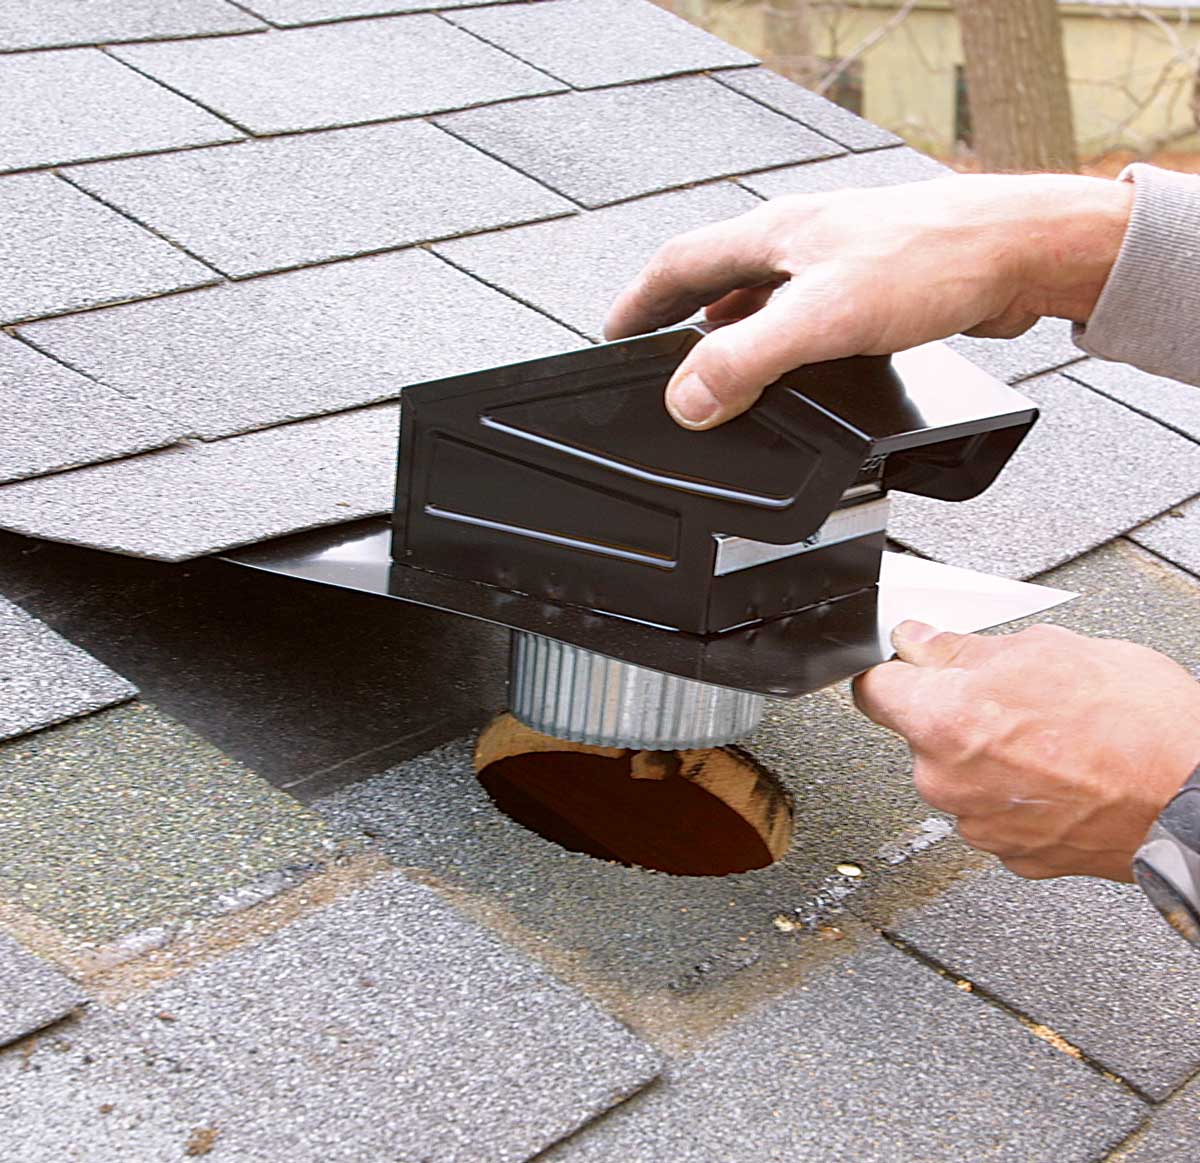 The vent faces down the roof. Slip the vent into the hole with the opening facing down, and secure it at each corner with galvanized roofing nails.